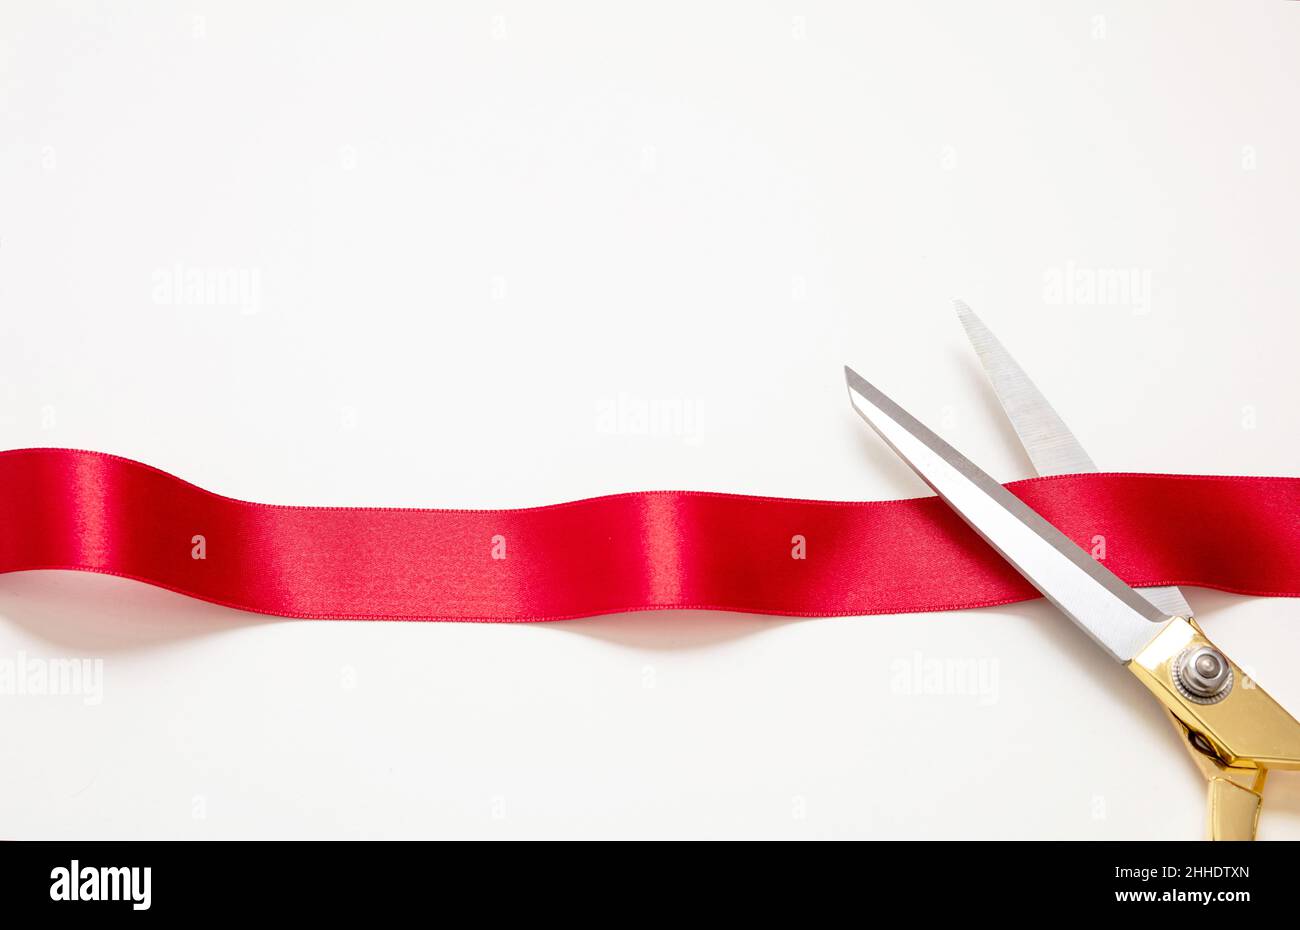 Grand Opening Red Ribbon Cutting Ceremony Kit - 25 Giant Scissors with Red  Satin Ribbon, Banner, Balloons,Bows and More Supplies Grand Opening  Decorations for Business - EZ Auction